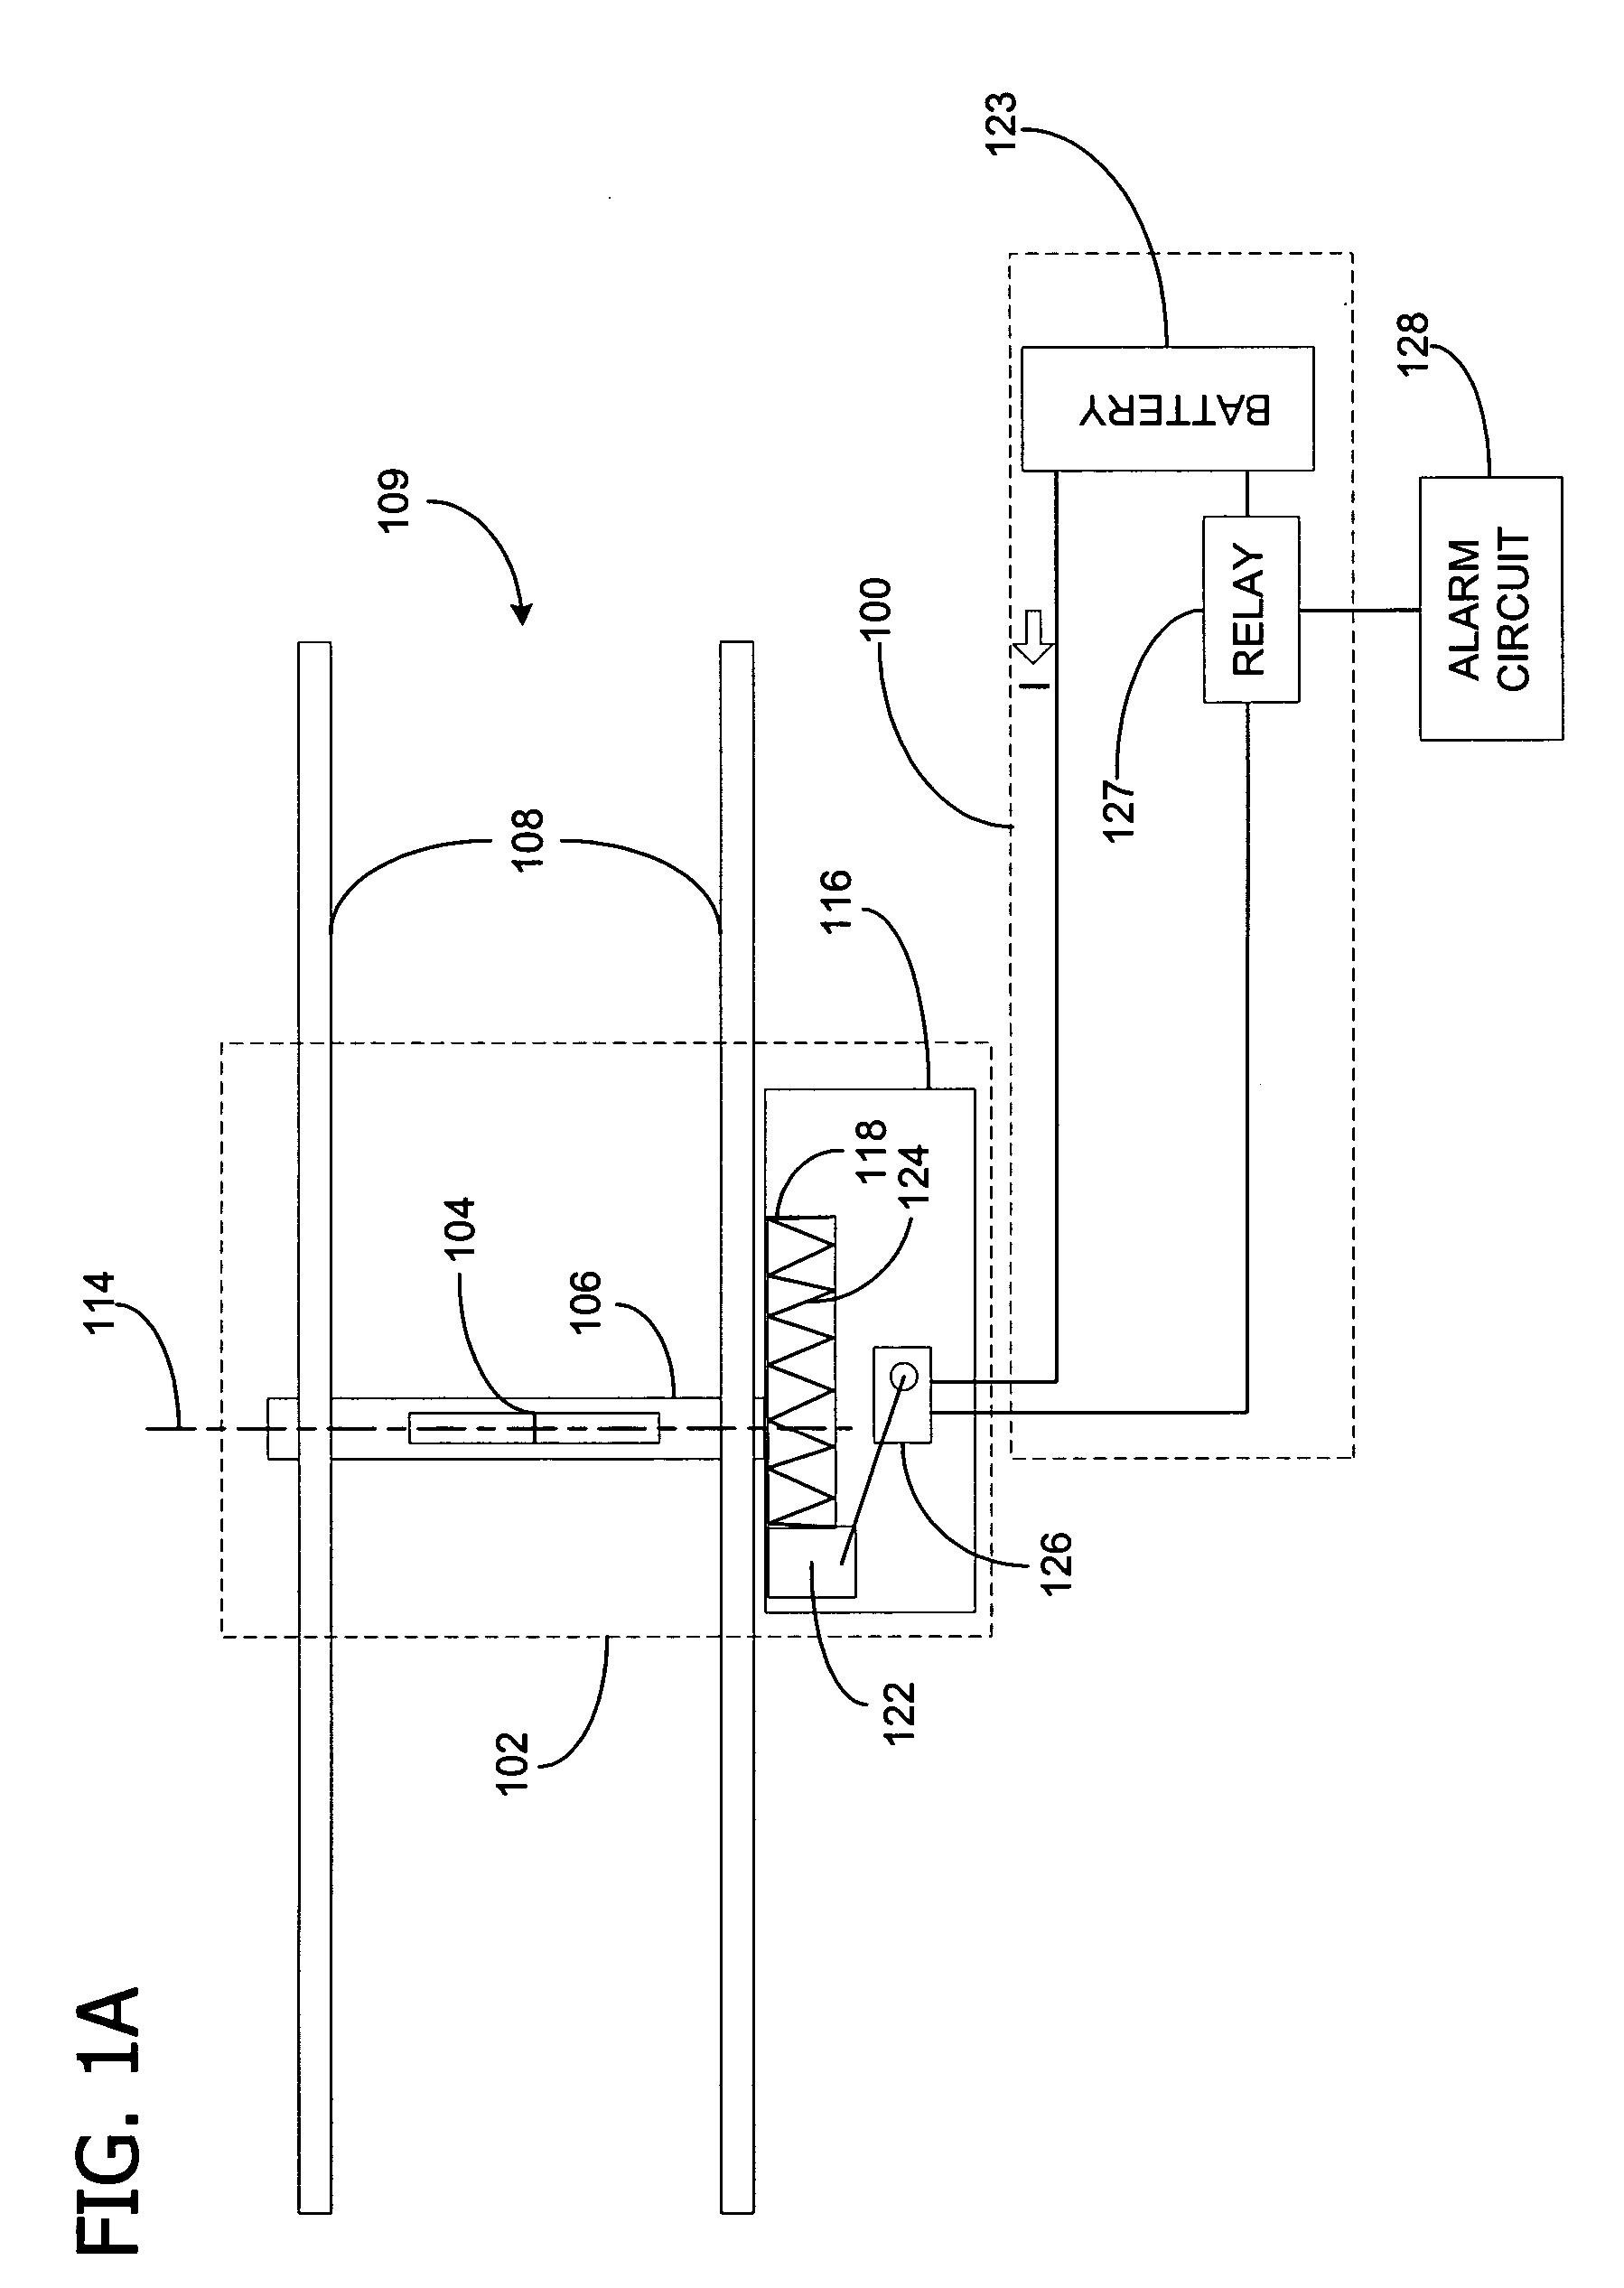 Apparatus and method for contact-less switching